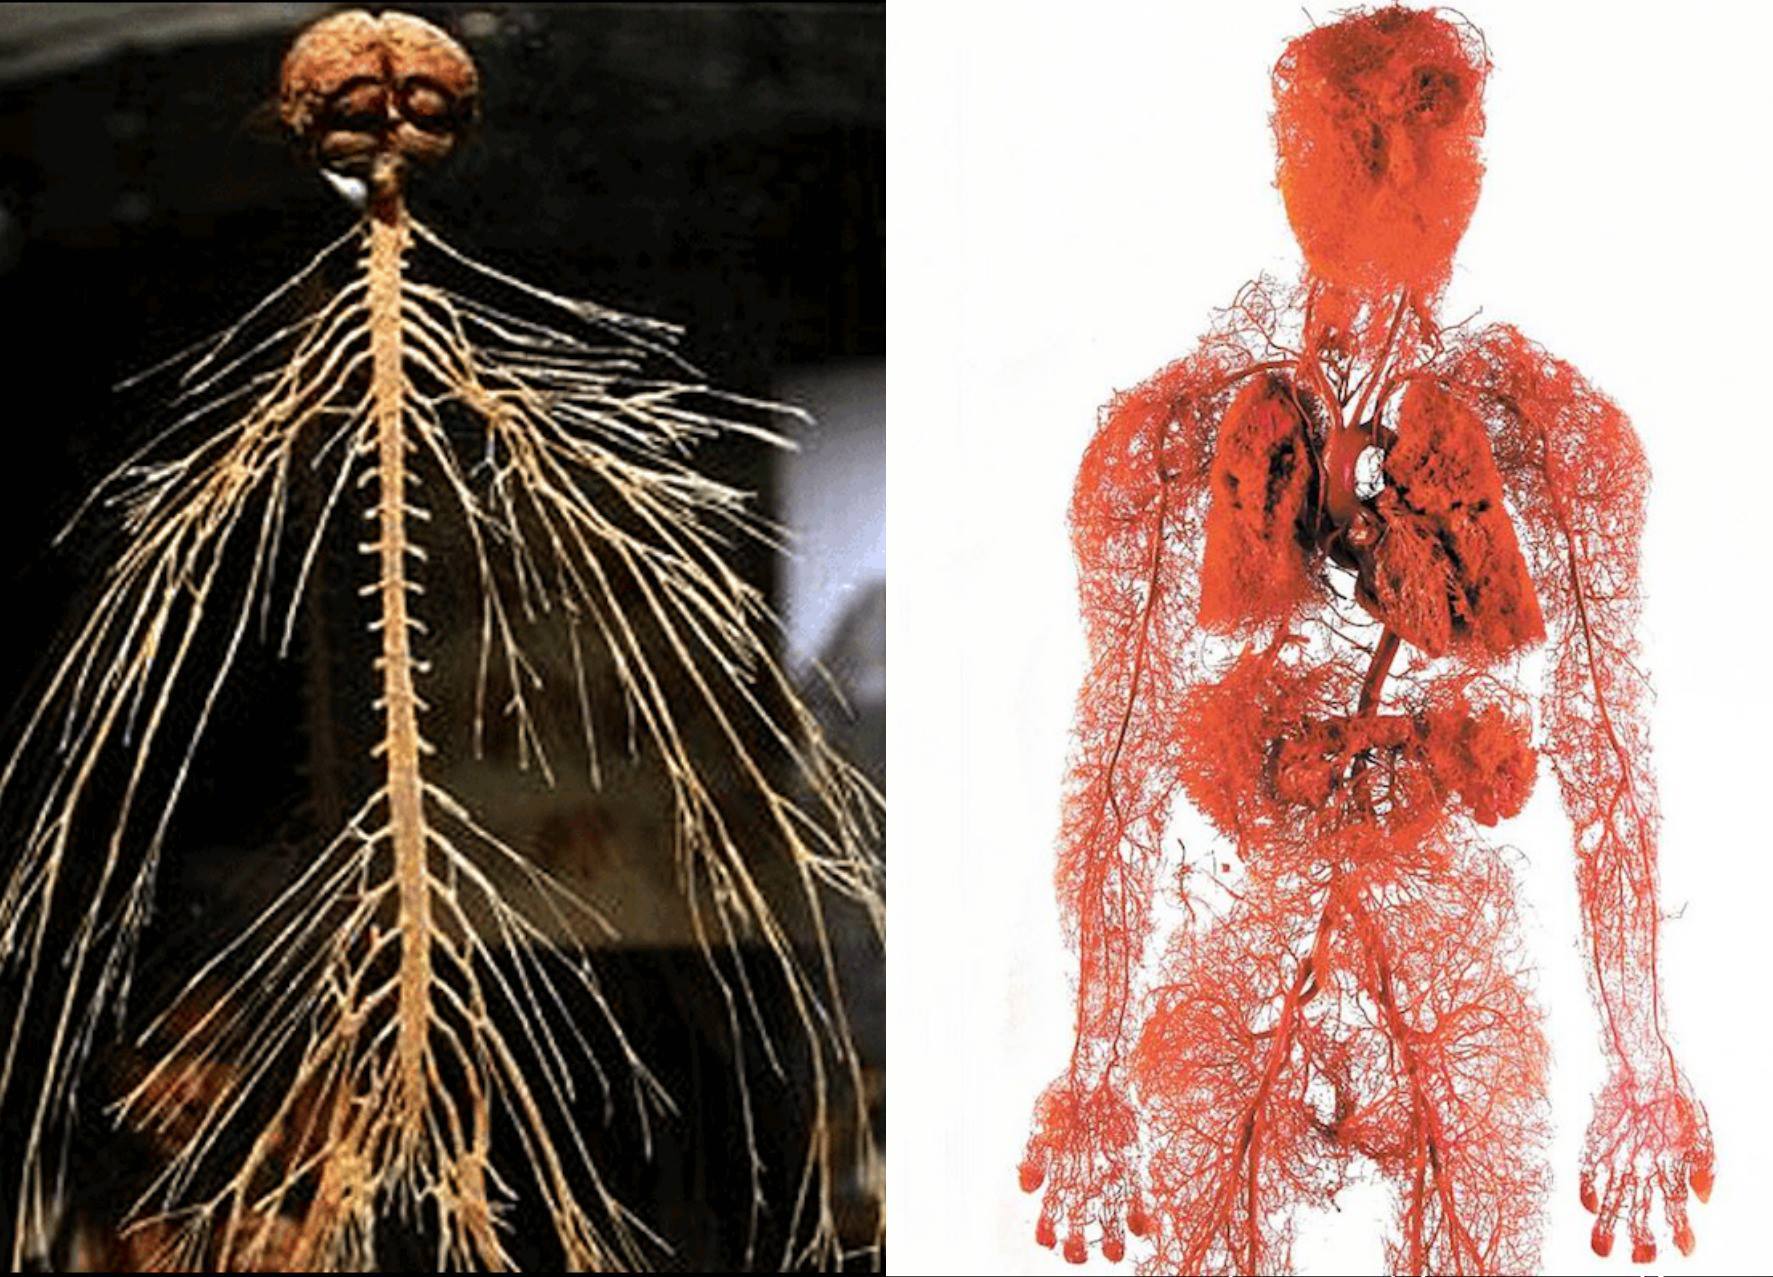 The blood vessels and nerves in the human body. Both of these were developed using a technique called "plastination" a method of preserving body parts. It replaces water and fat with certain plastics, resulting in specimens that do not decay.